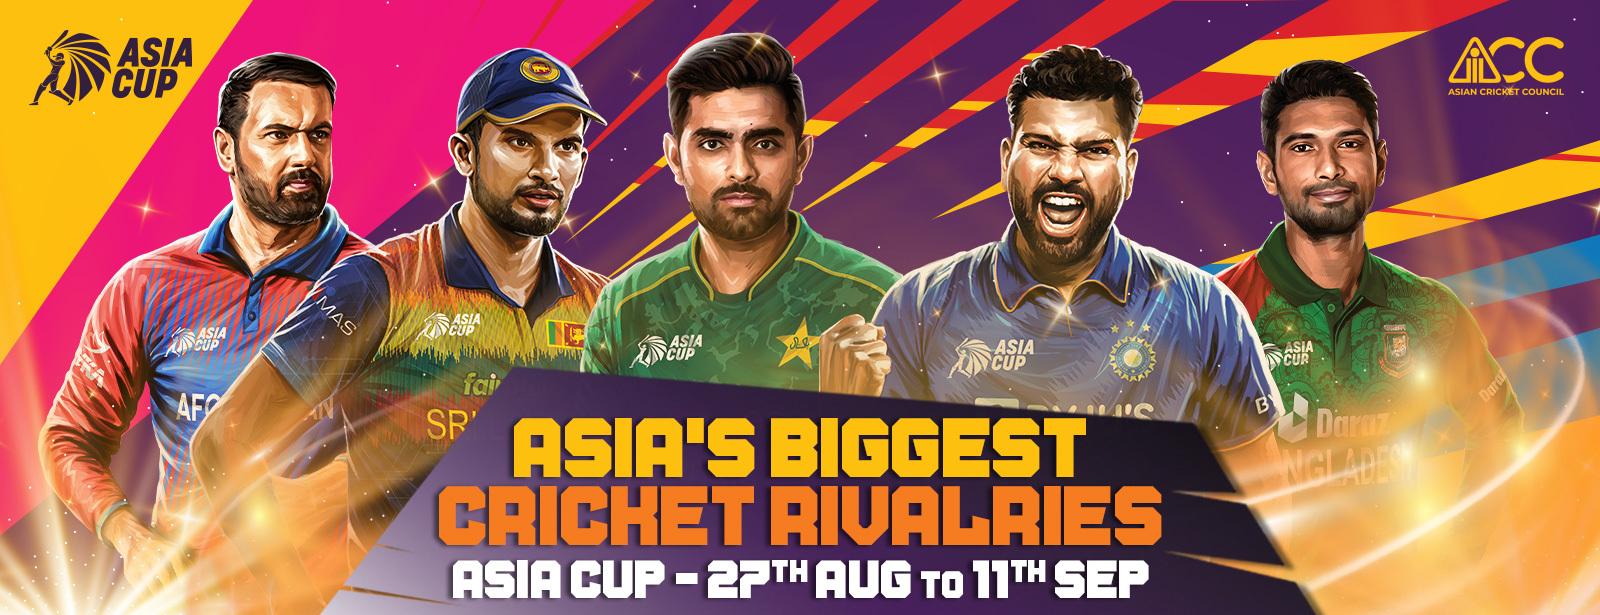 Asia Cup 2022 Tickets: Bumper demand for India vs Pakistan Asia Cup match tickets crashes official website, nearly 700,000 log in to book tickets: Follow Asia Cup Cricket LIVE